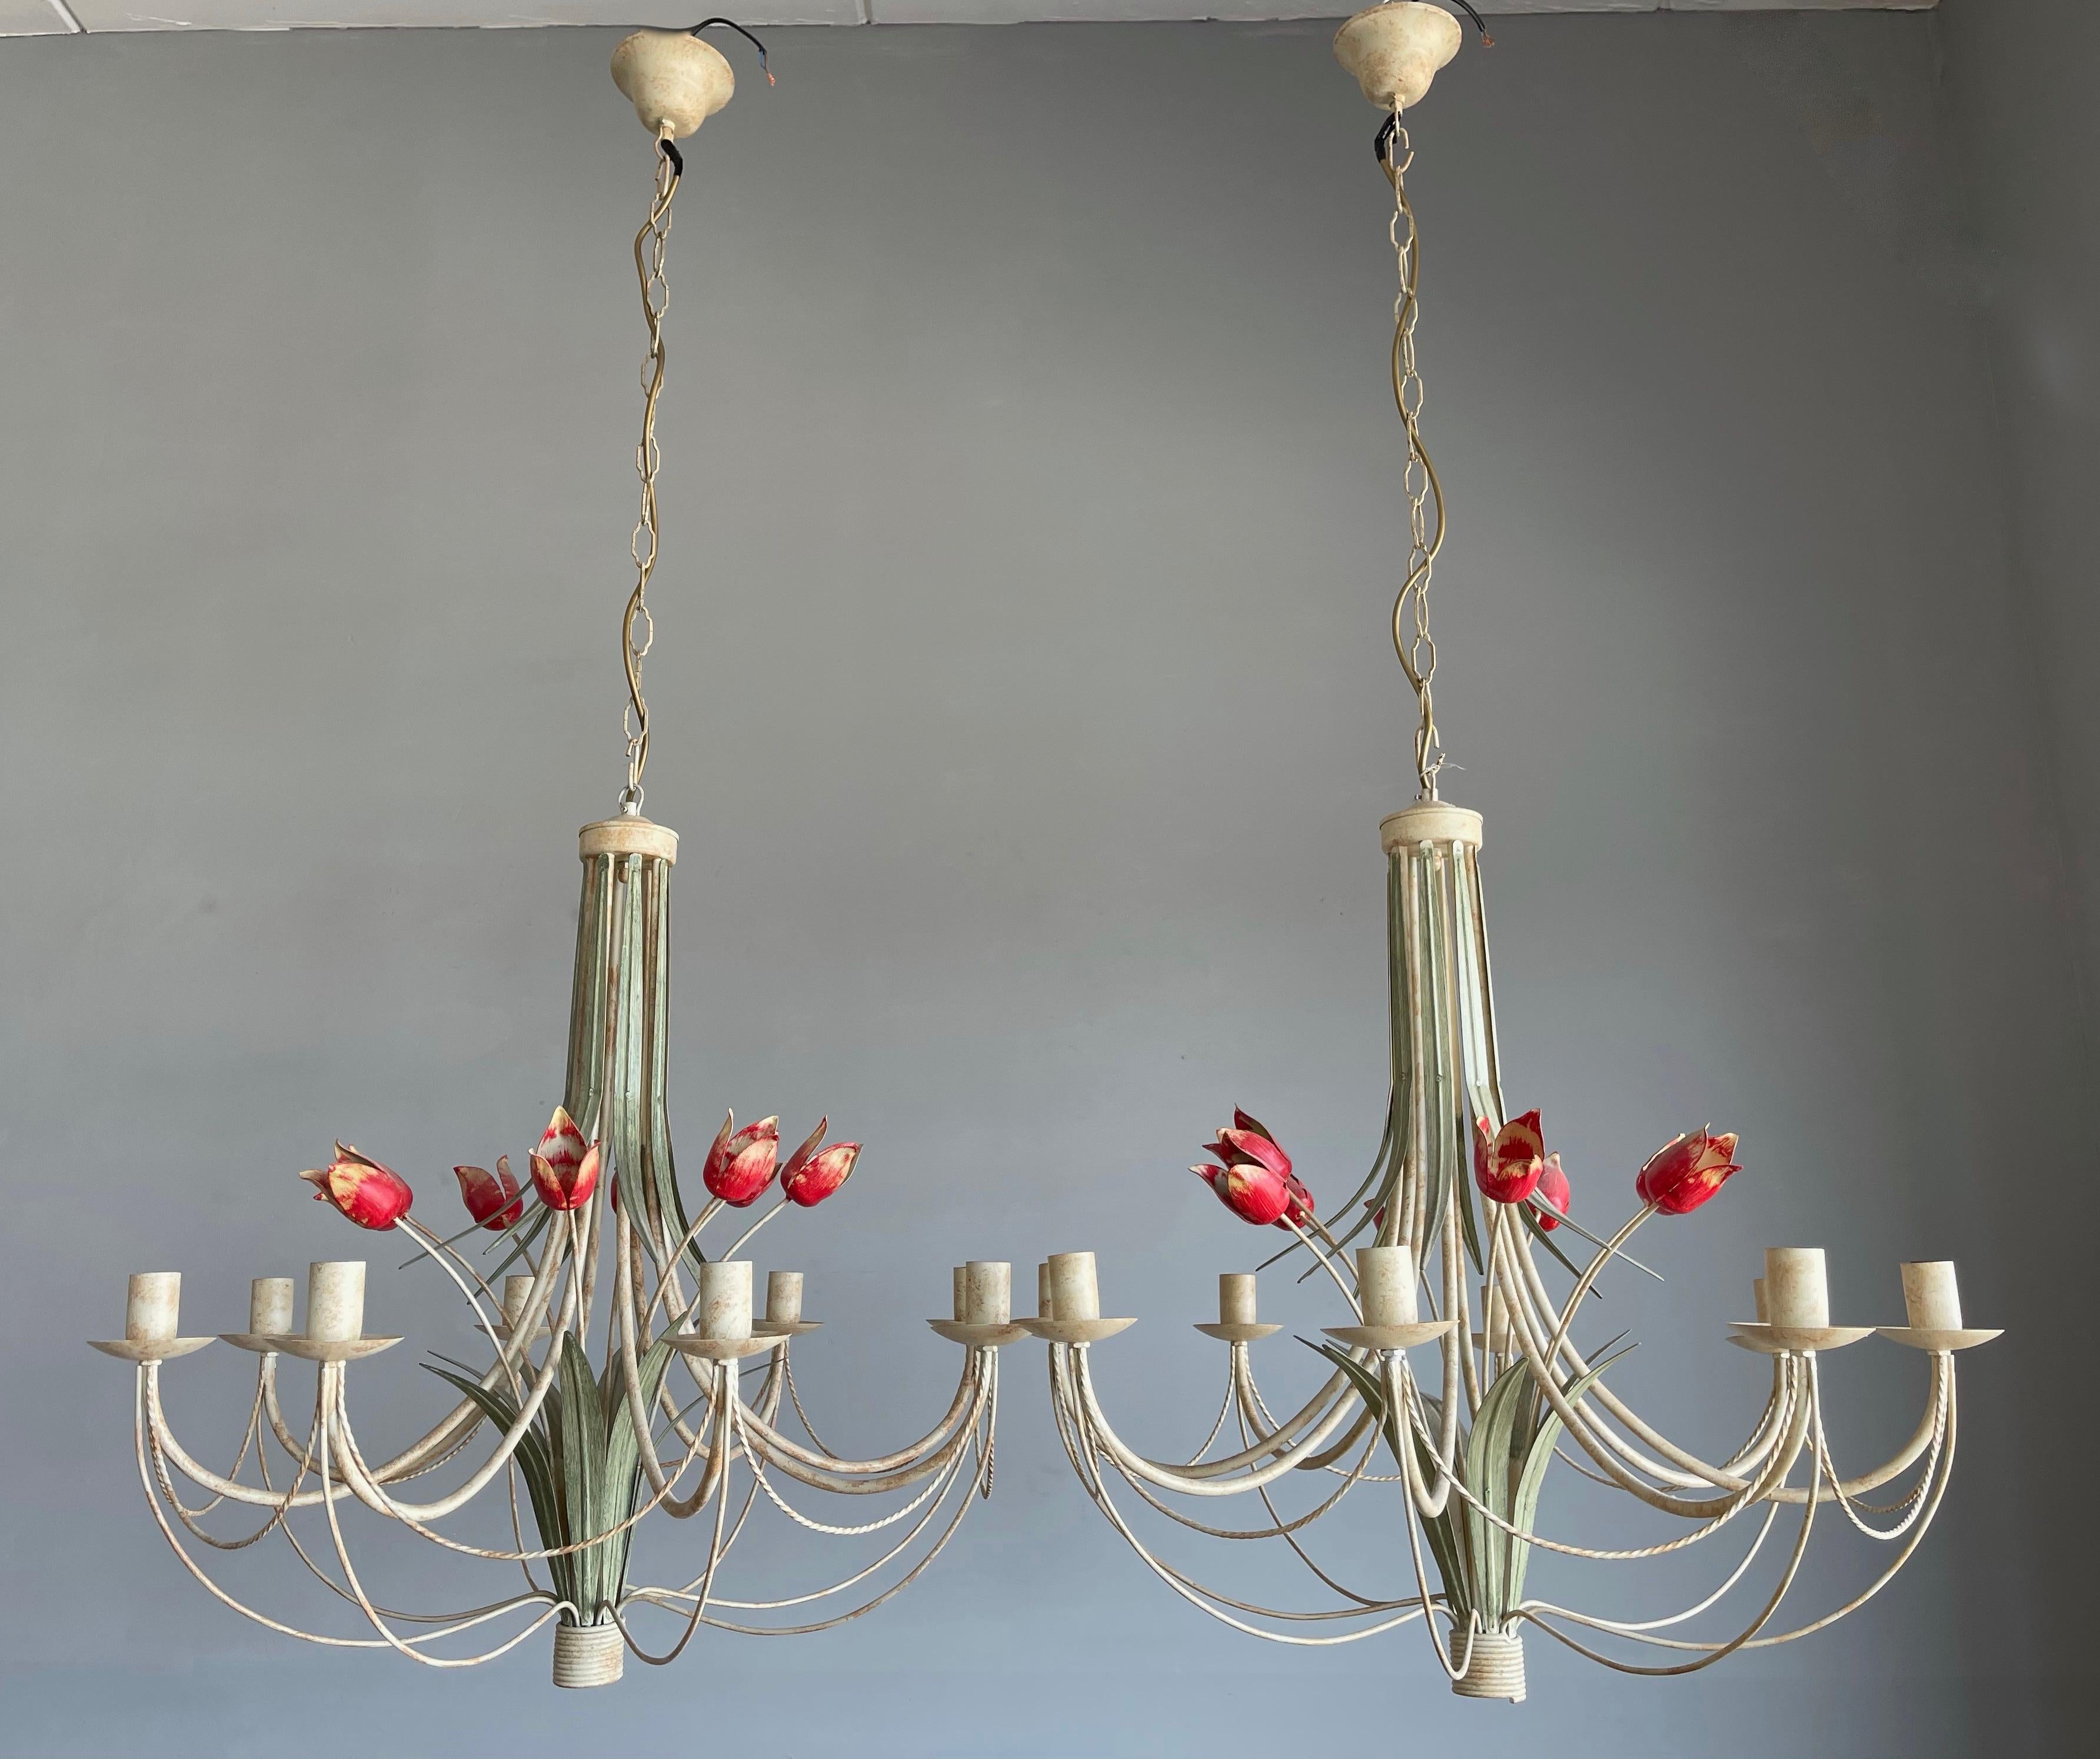 Stunning design, Italian Made, Dutch tulip tole pendant lights.

This incredibly well designed and beautifully executed pair of decorative chandeliers is in mint condition. When you are born and raised in Holland, like we have, then you have learned